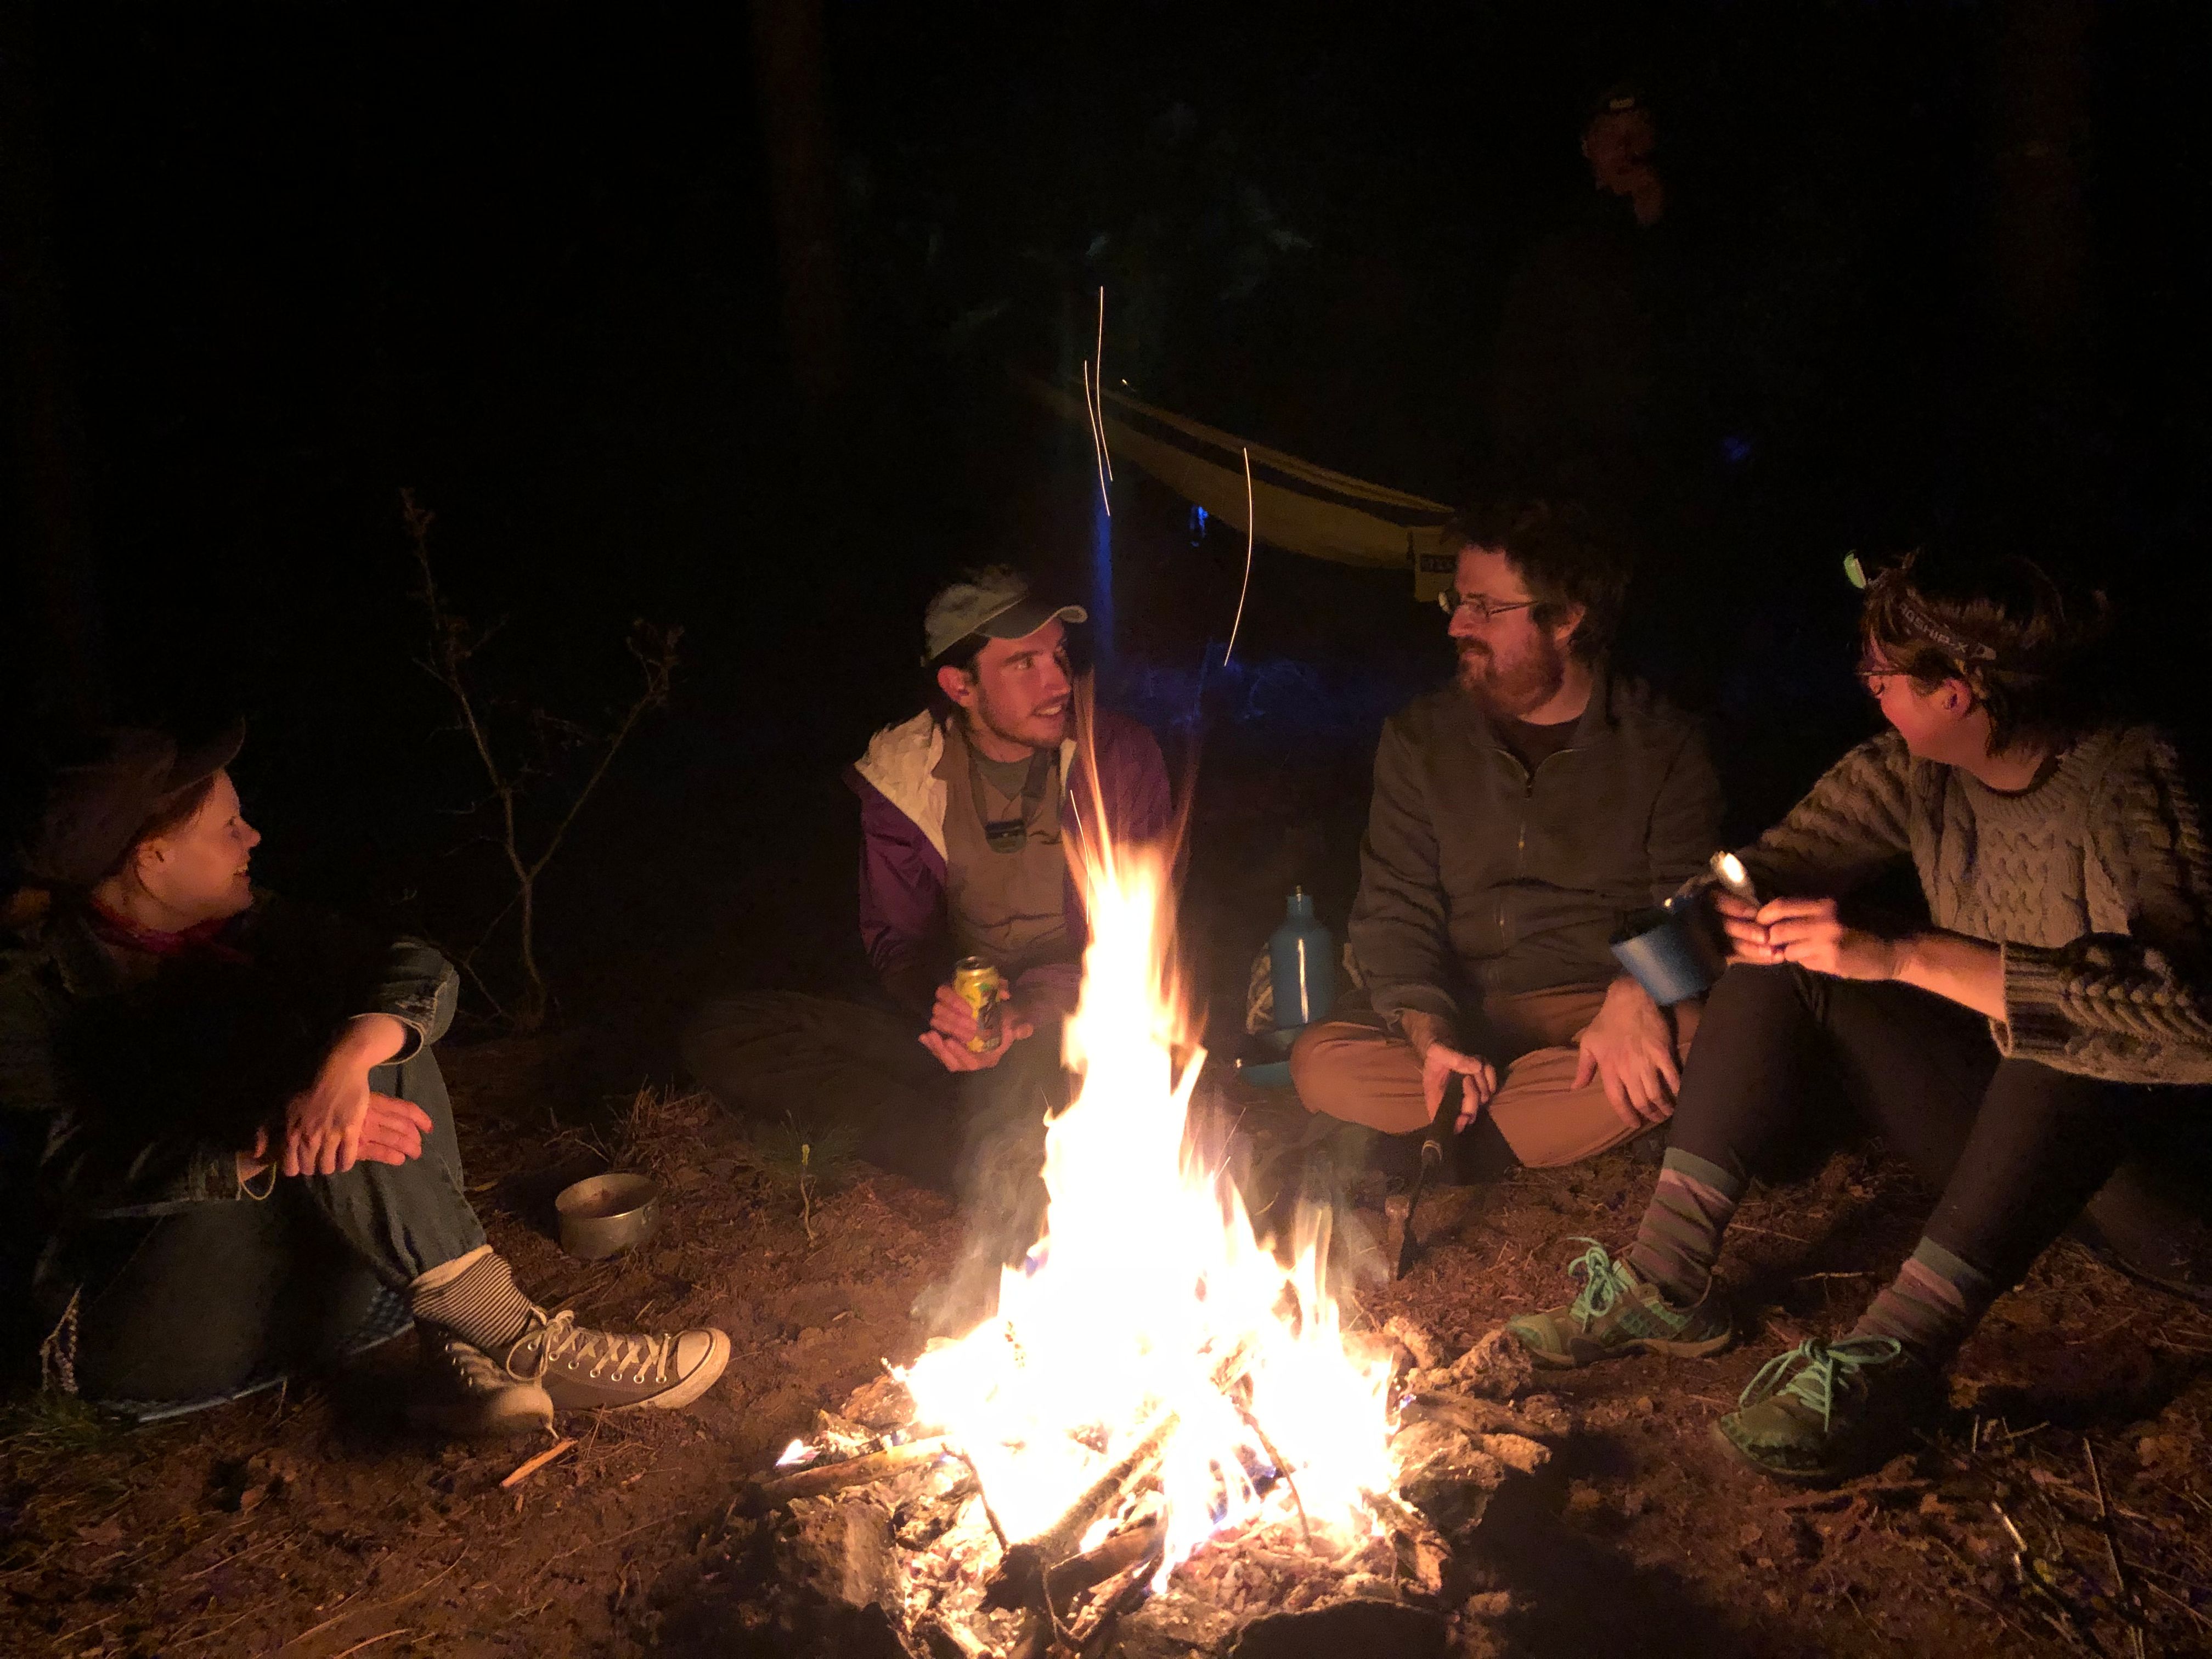 Summiteers sit around a camp bonfire in the woods. (Circa spring 2020 beginning of Covid)